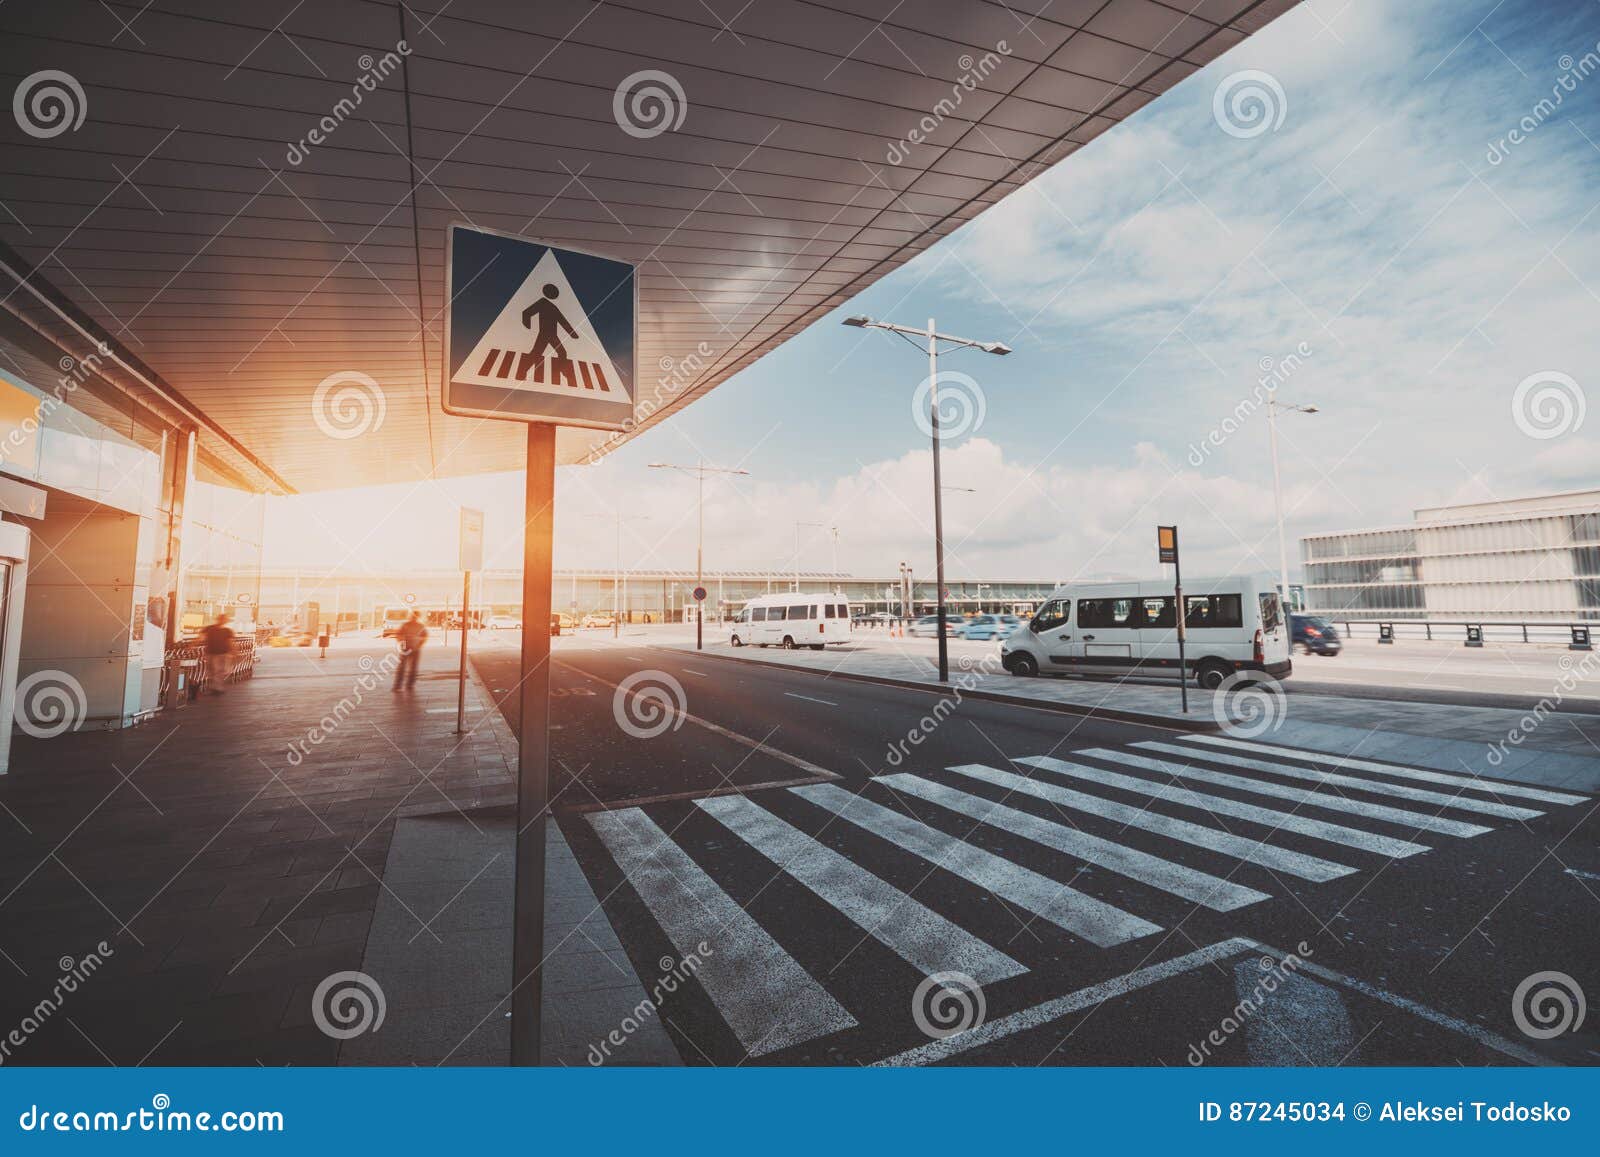 pedestrian crossing next to airport entrance